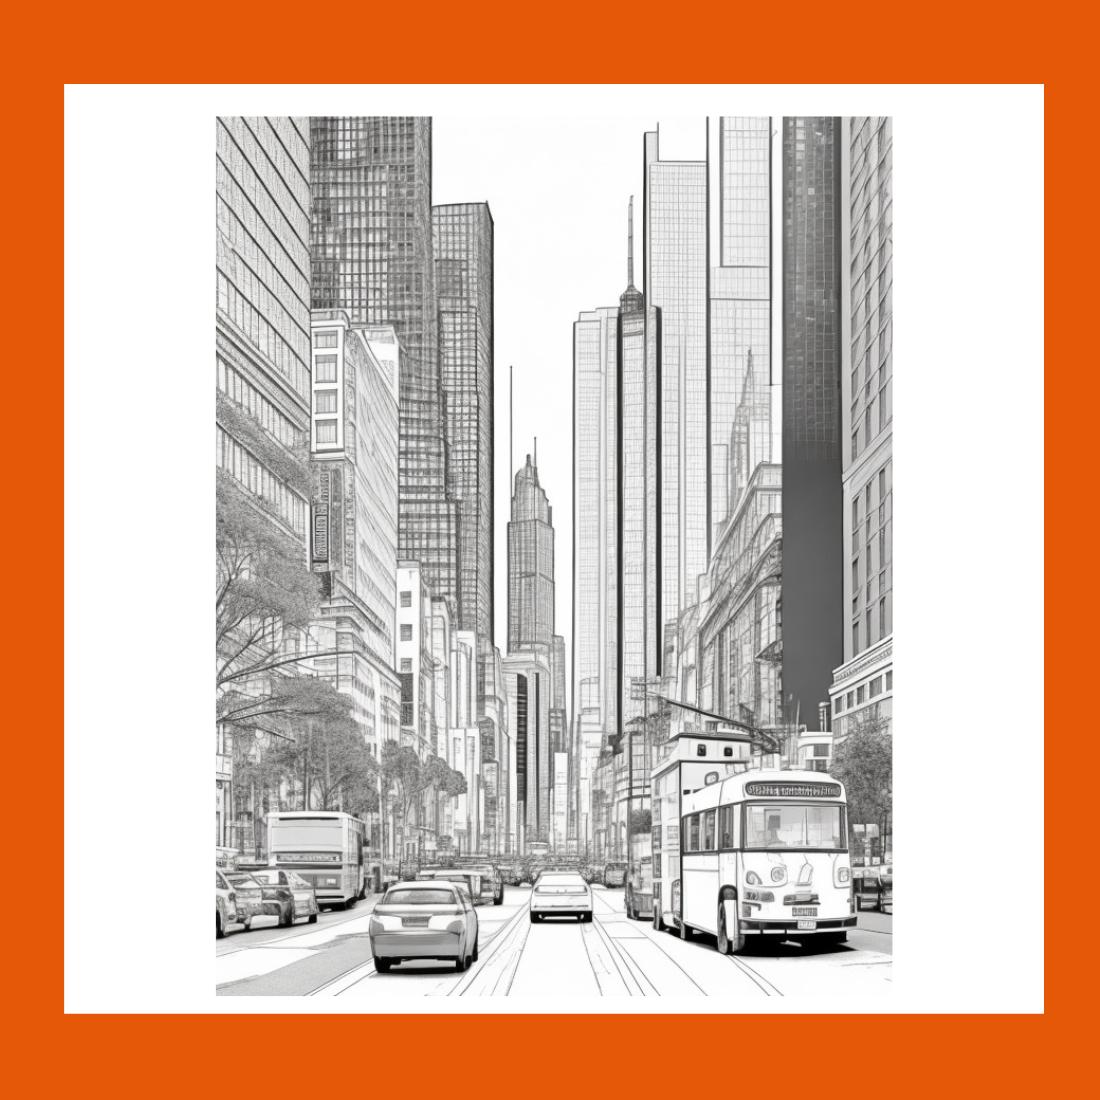 A cityscape with skyscrapers and a busy street scene coloring page 1 preview image.